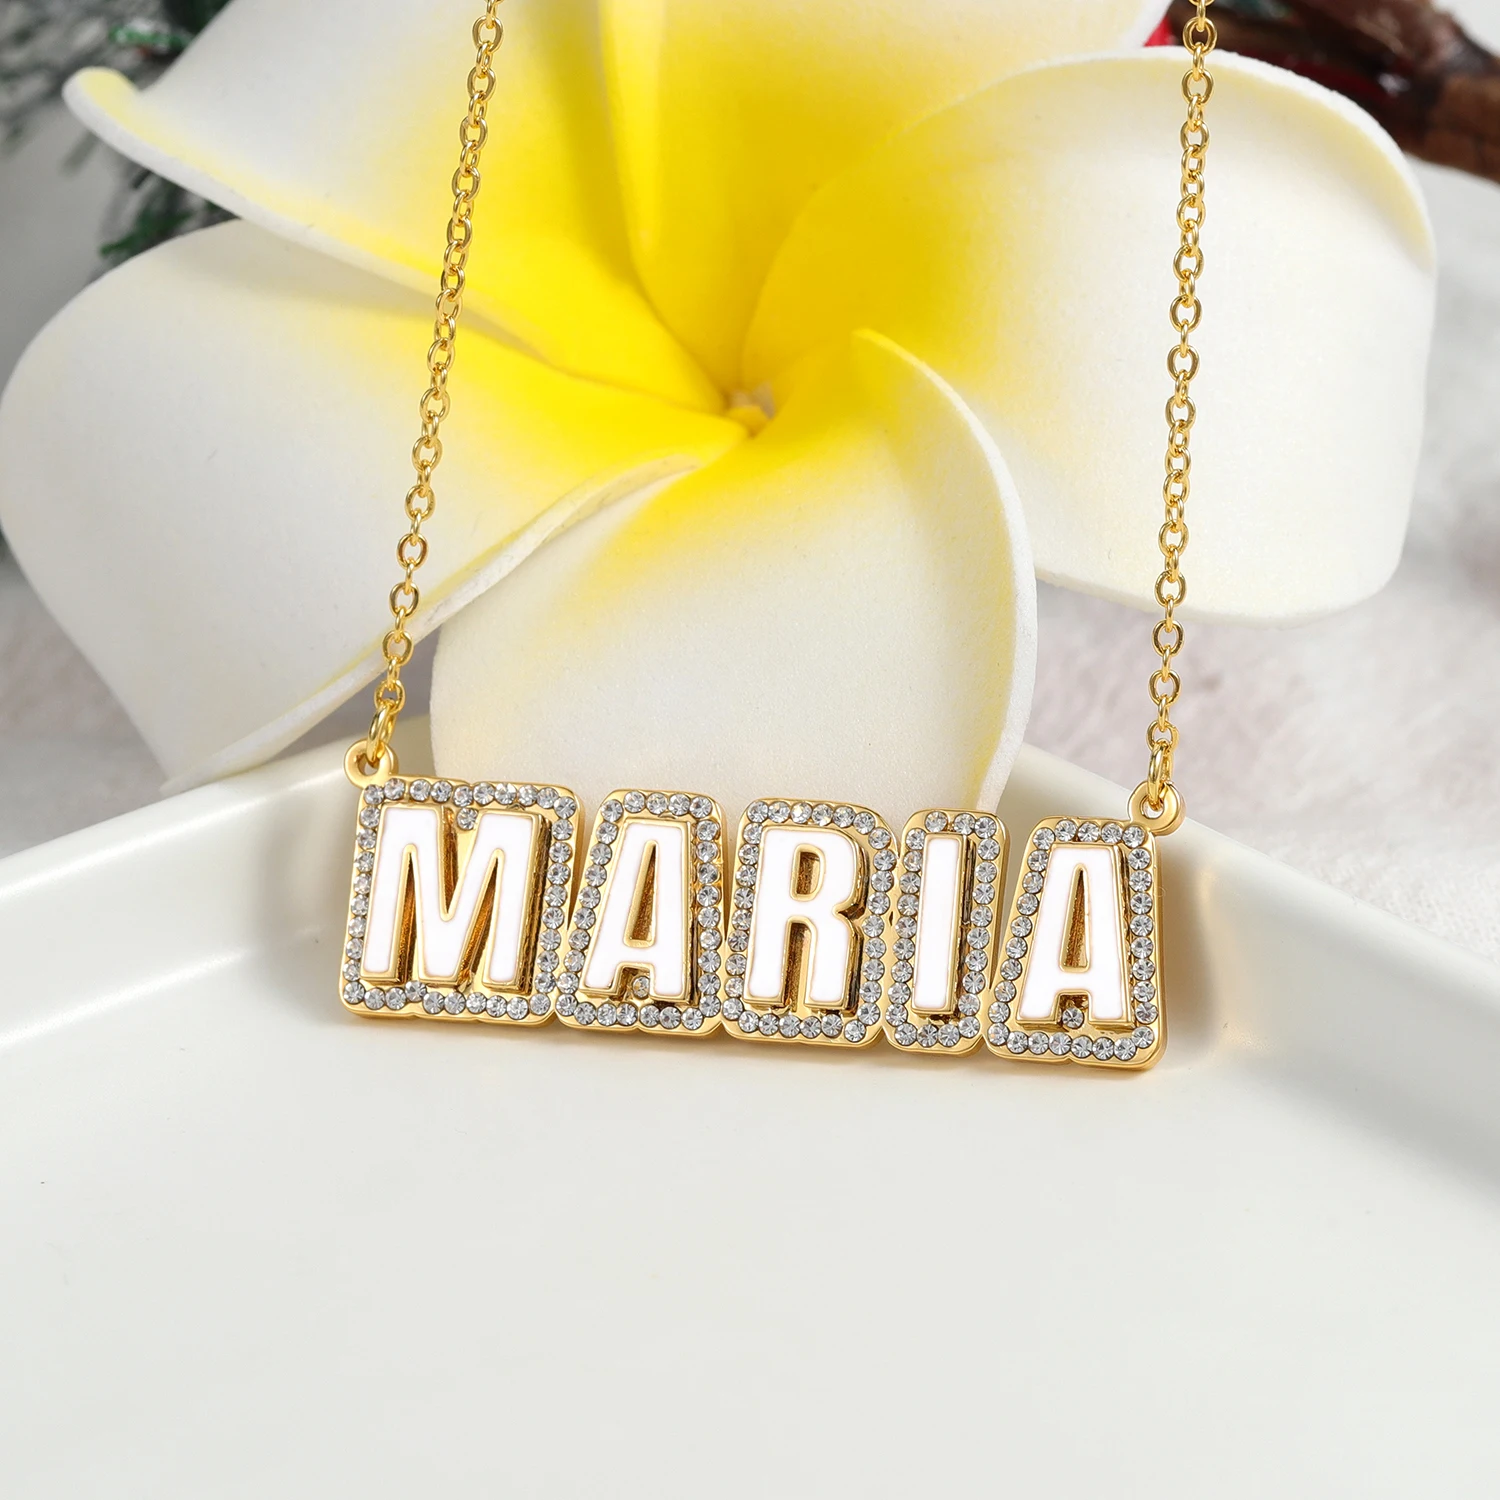 Customized Necklace New Enamel Name Necklace For Women Personalized Crystal Letter Nameplate Pave Outline Necklace Jewelry Gifts